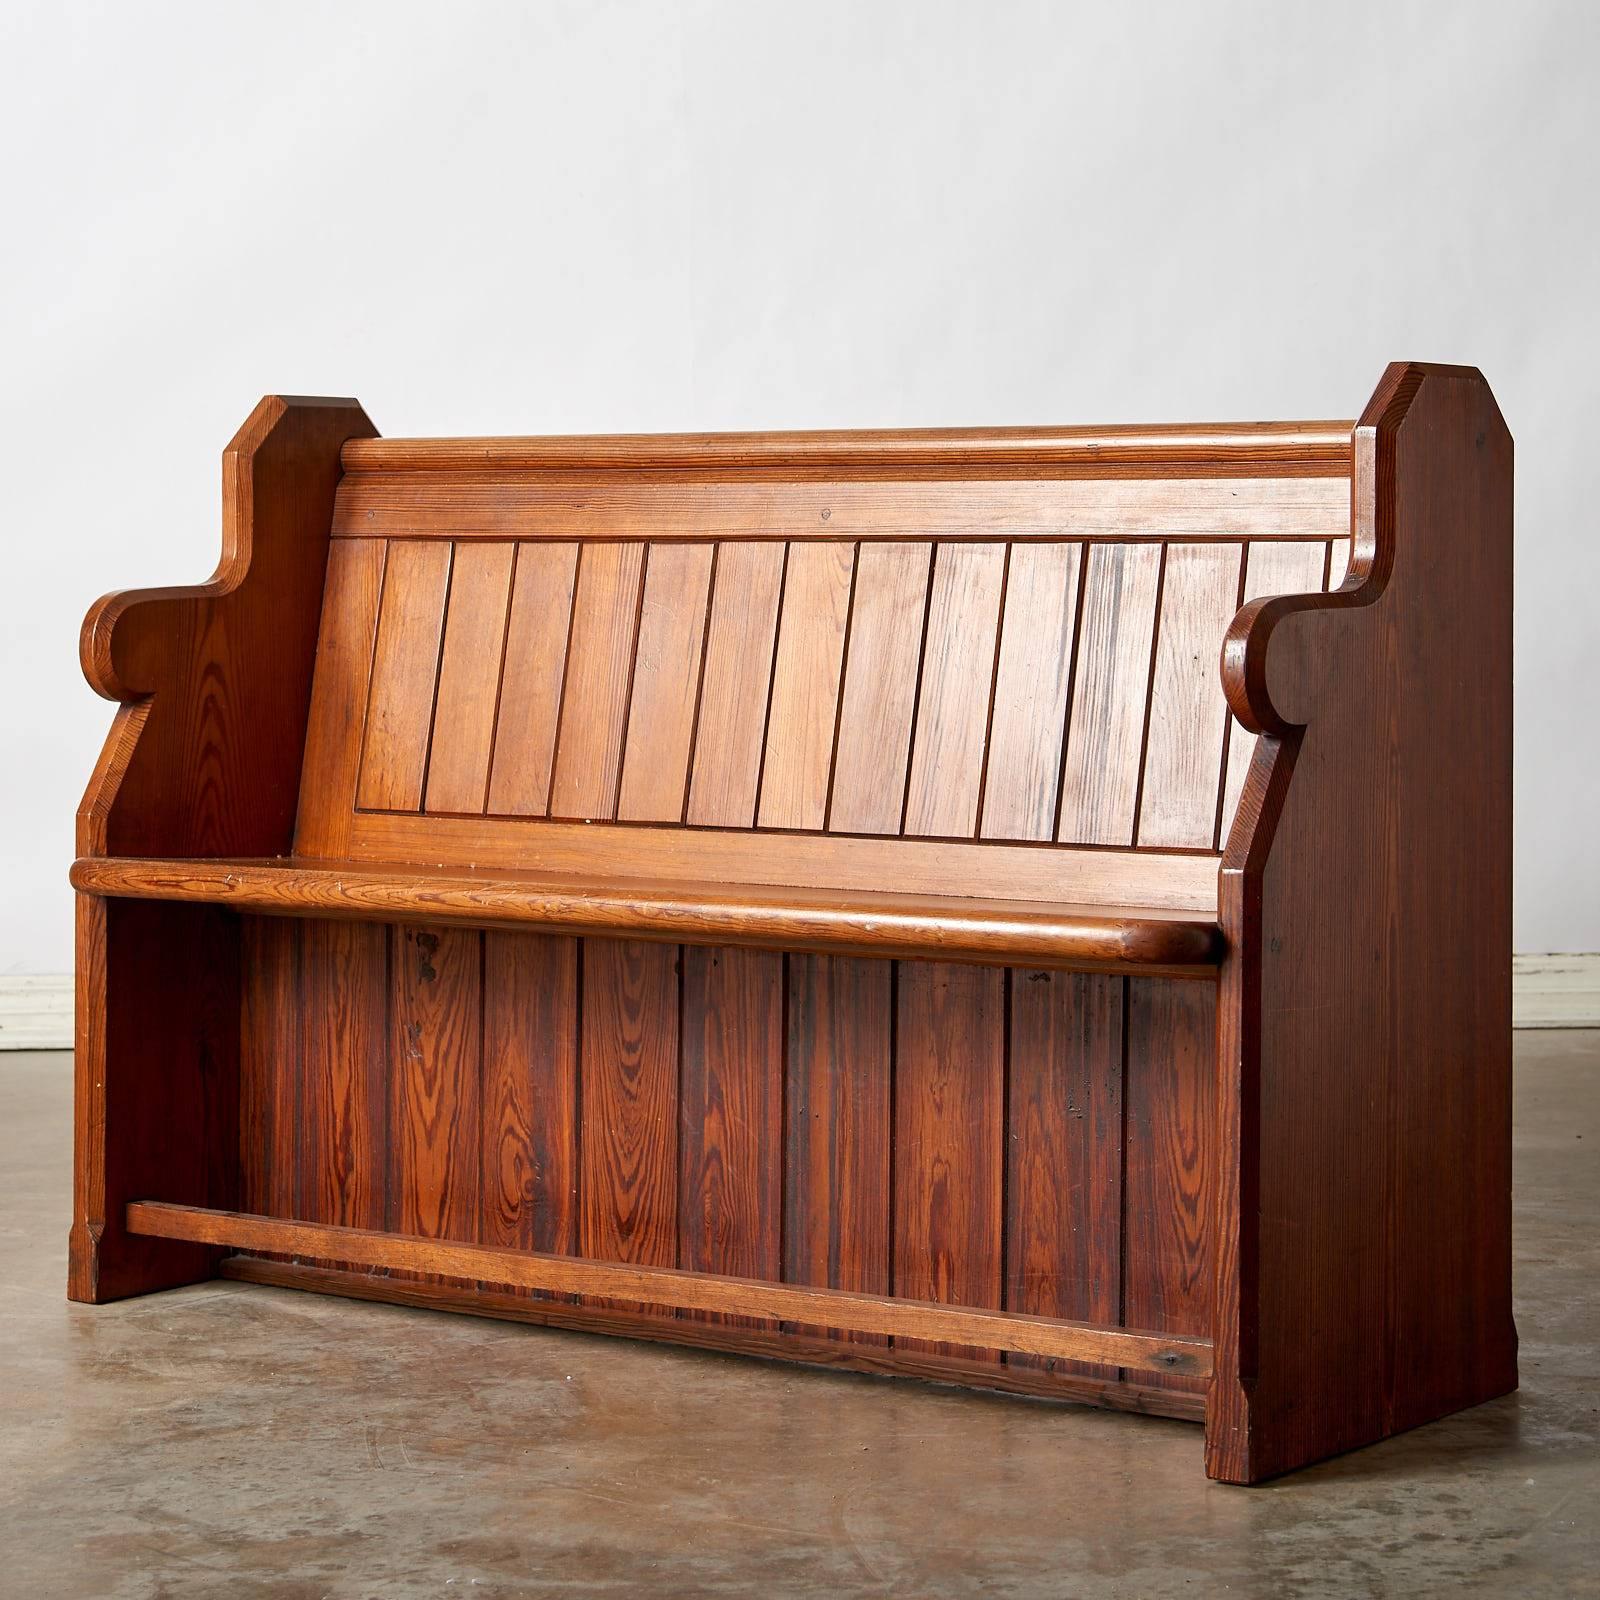 A standalone church pew of solid construction with bible holder behind backrest.